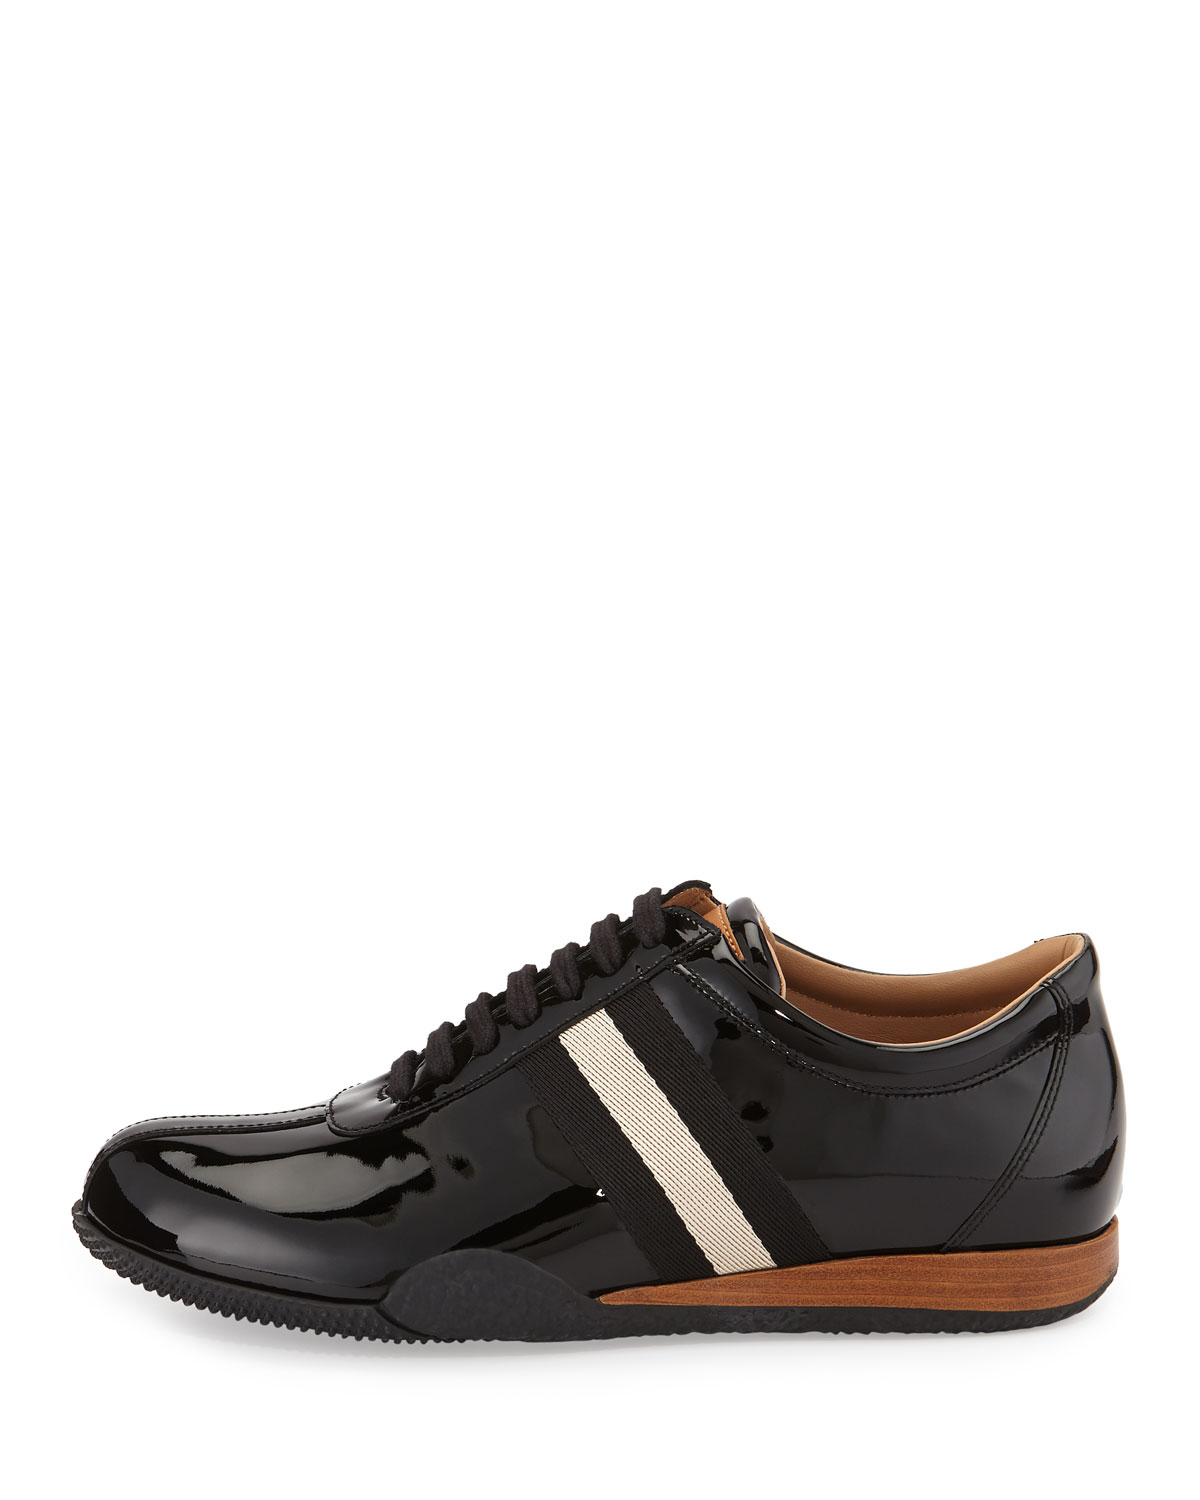 Lyst - Bally Frenz Patent Leather Sneaker in Blue